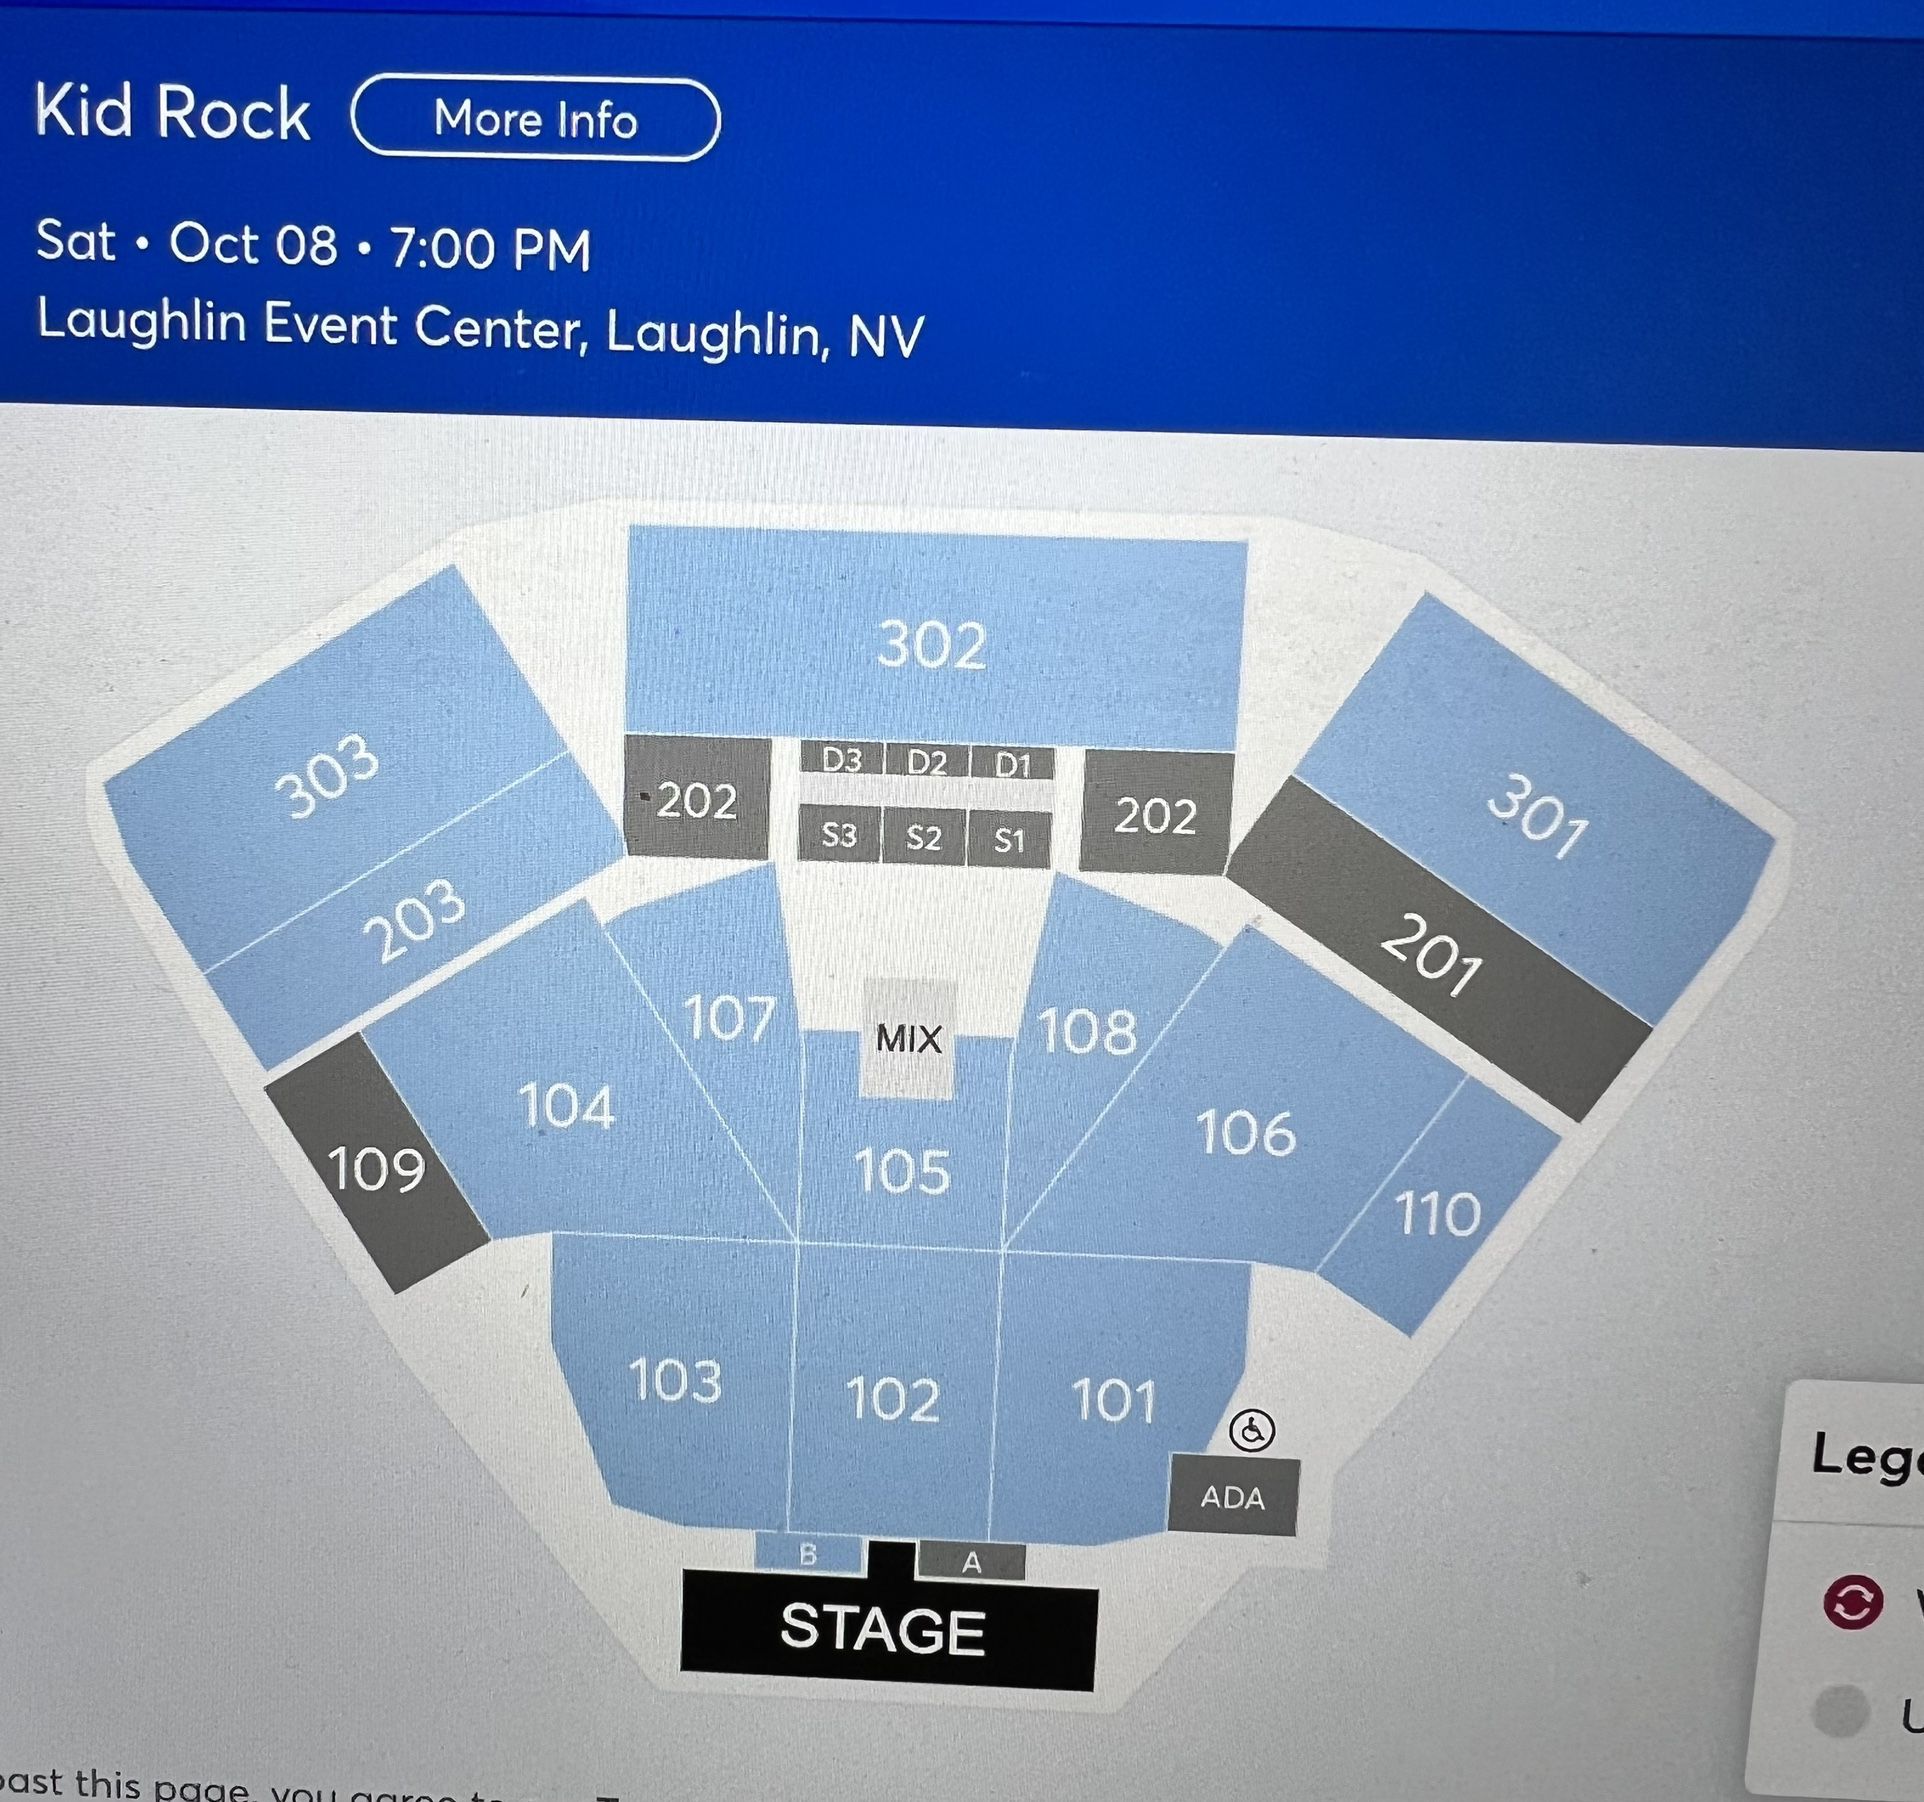 Kid Rock Concert Tickets  $700 For Both Tickets 